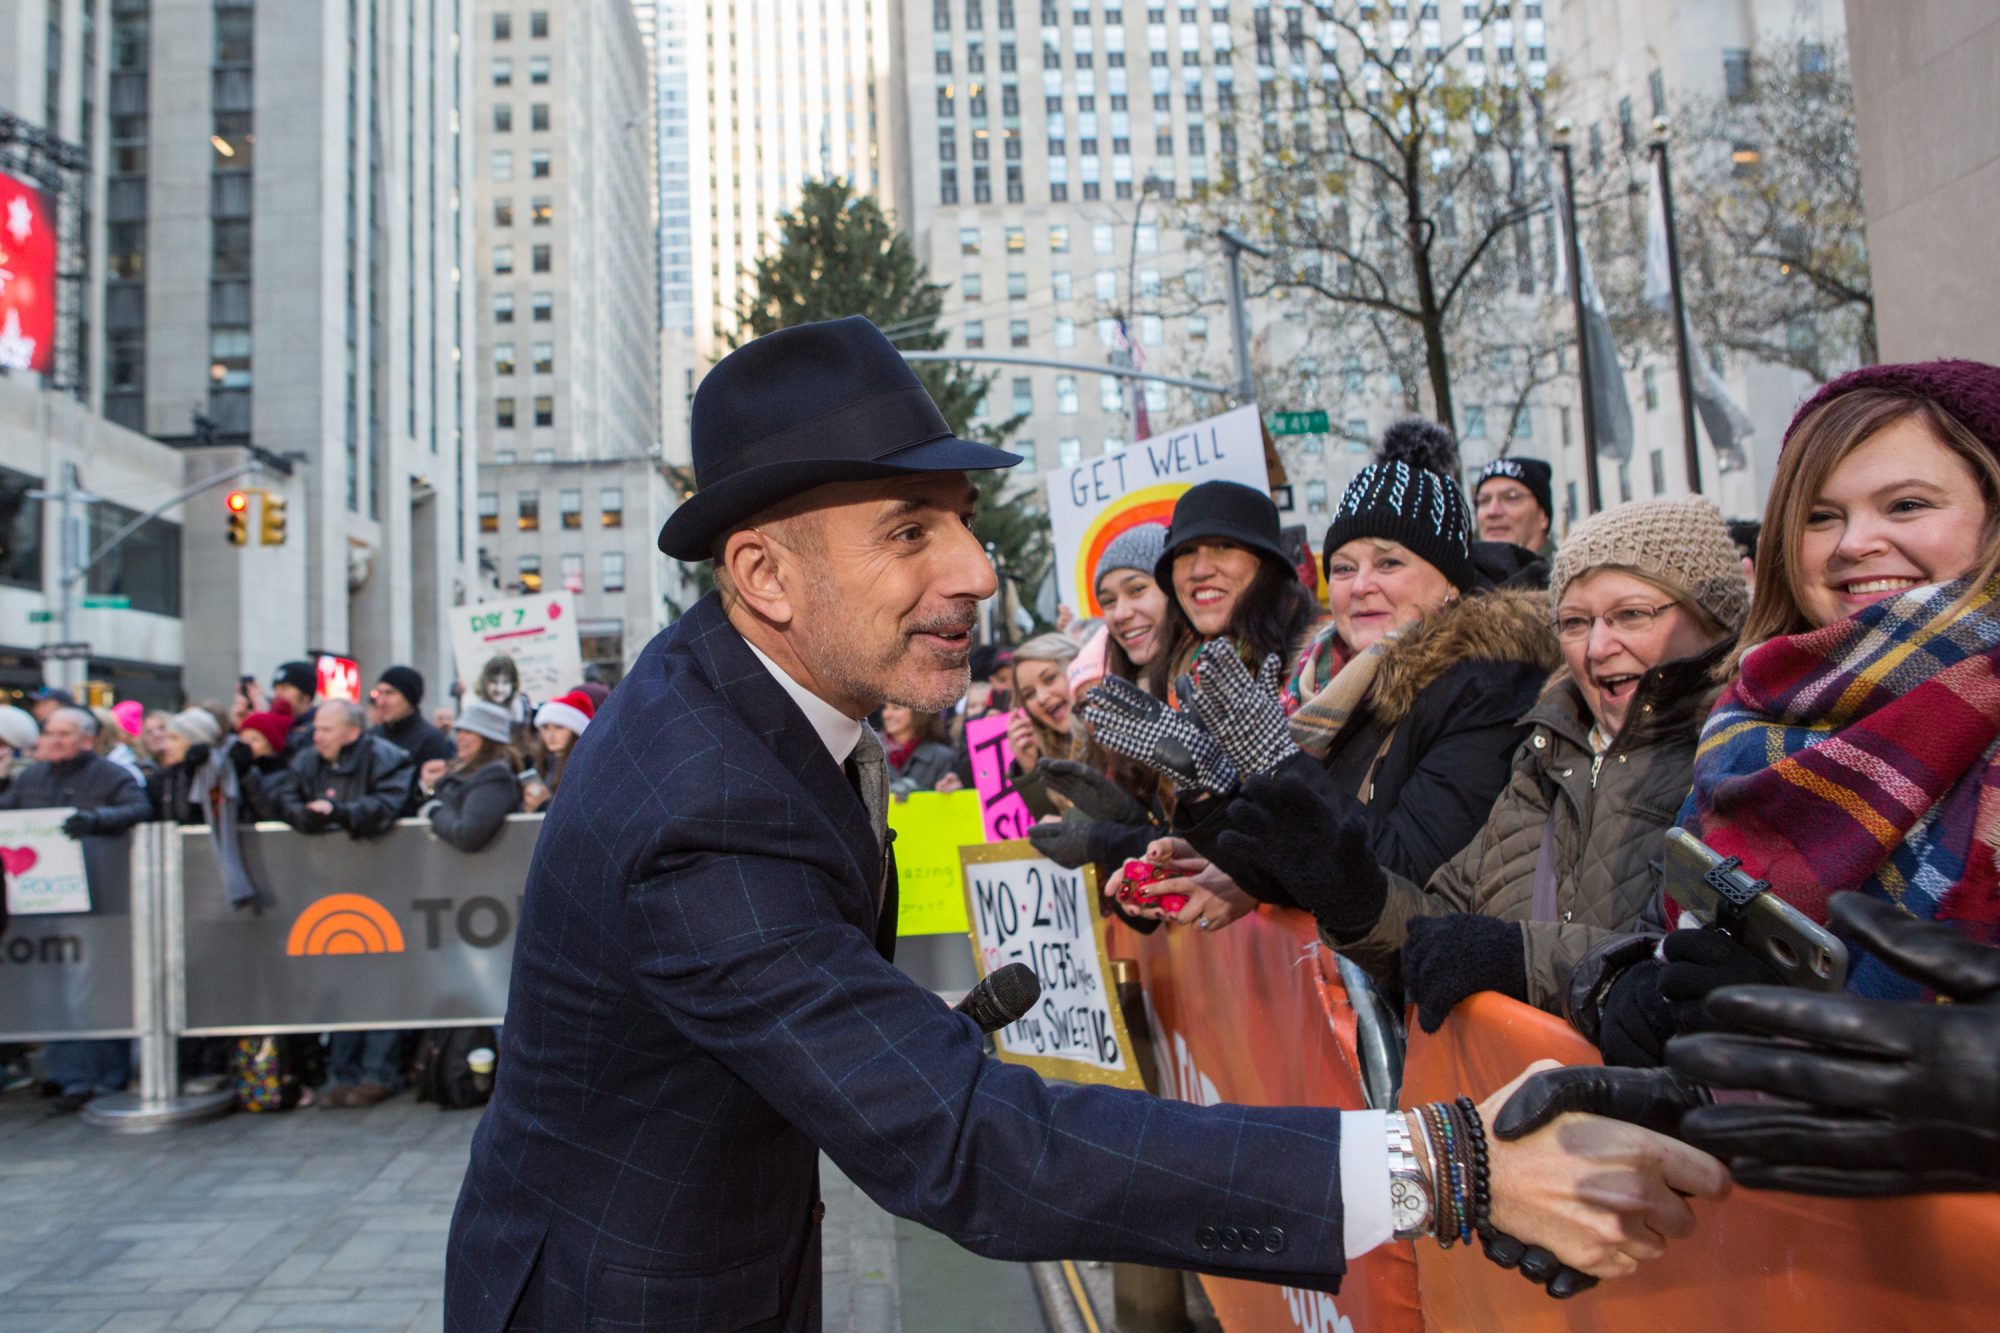 TODAY -- Pictured: Matt Lauer on Monday, November 27, 2017 -- (Photo by: Nathan Congleton/NBC/NBCU Photo Bank via Getty Images)